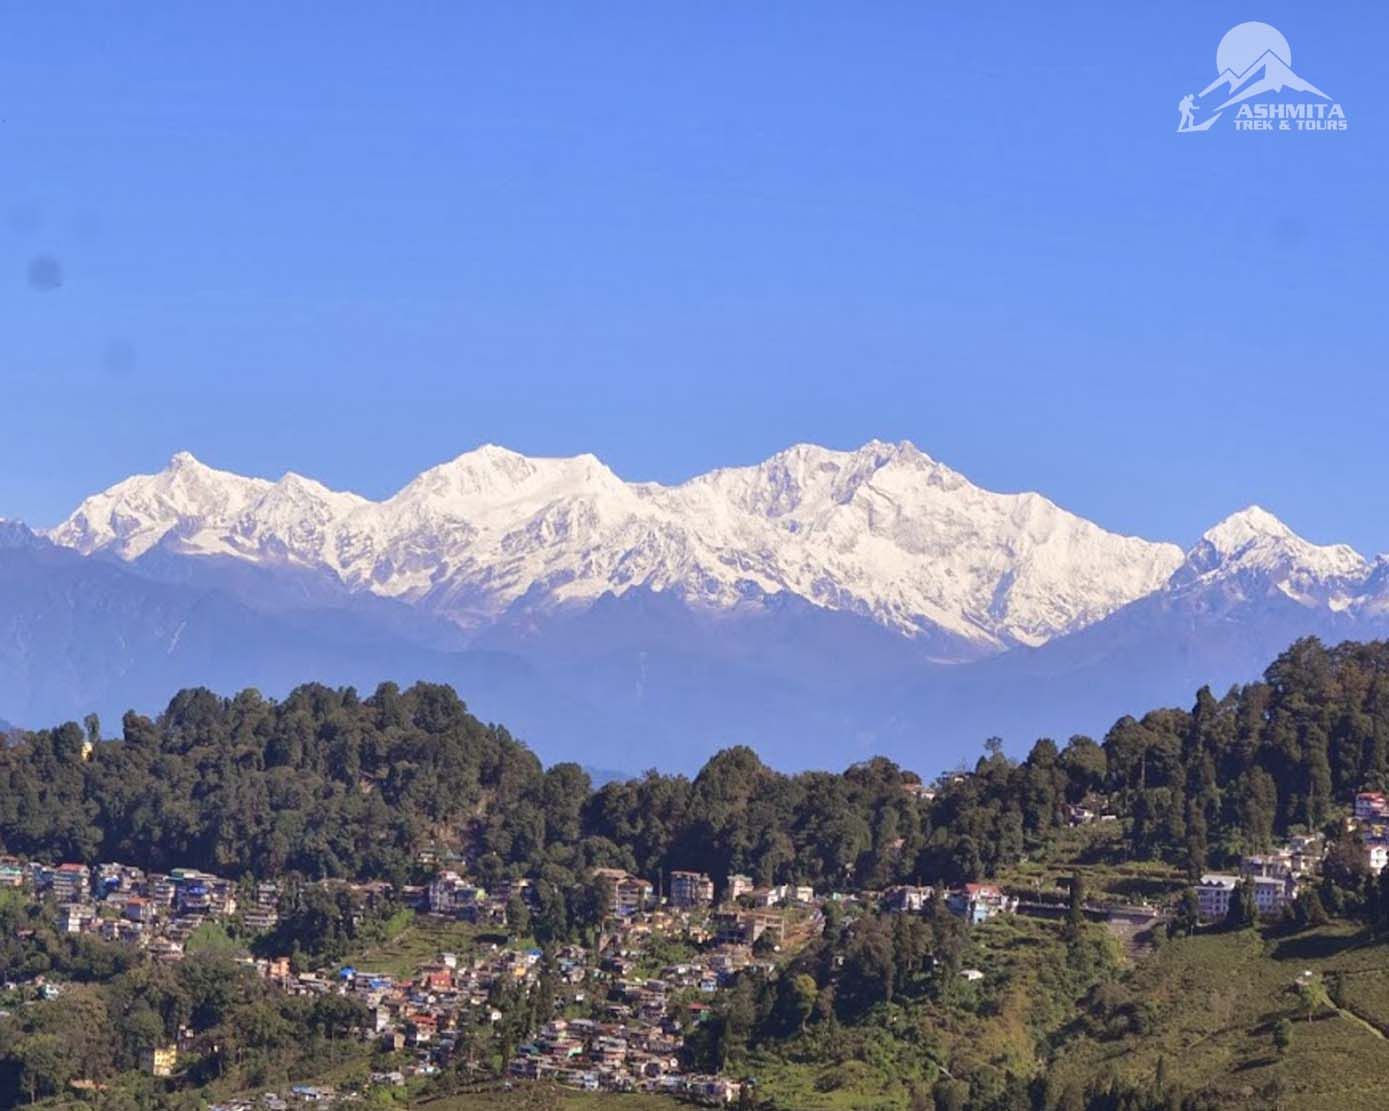 A view of mighty Mt Kanchenjunga seen from Darjeeling